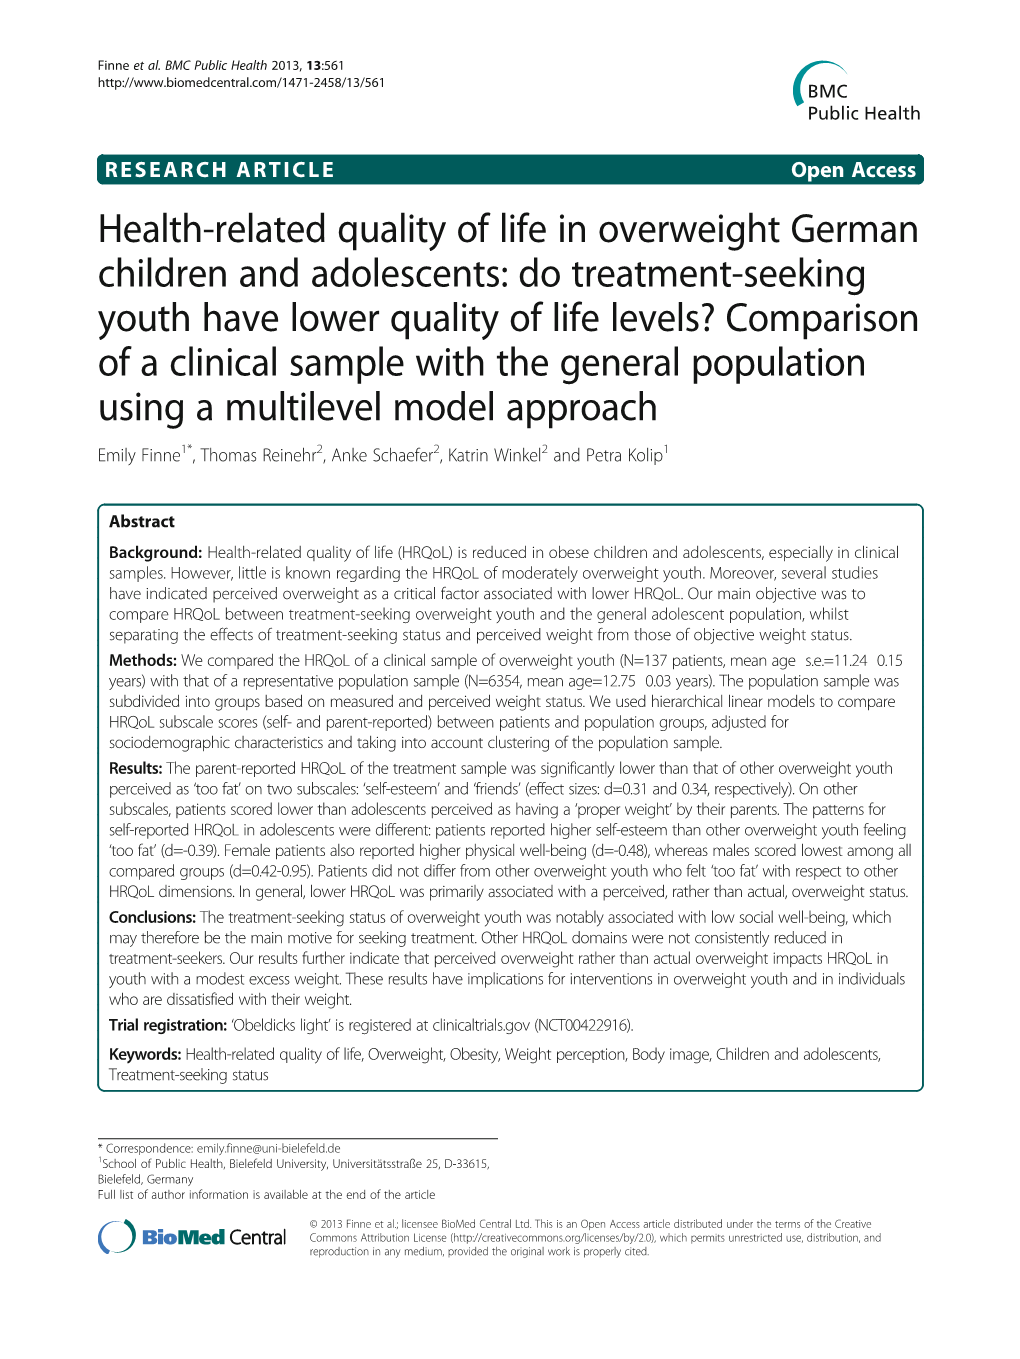 Health-Related Quality of Life in Overweight German